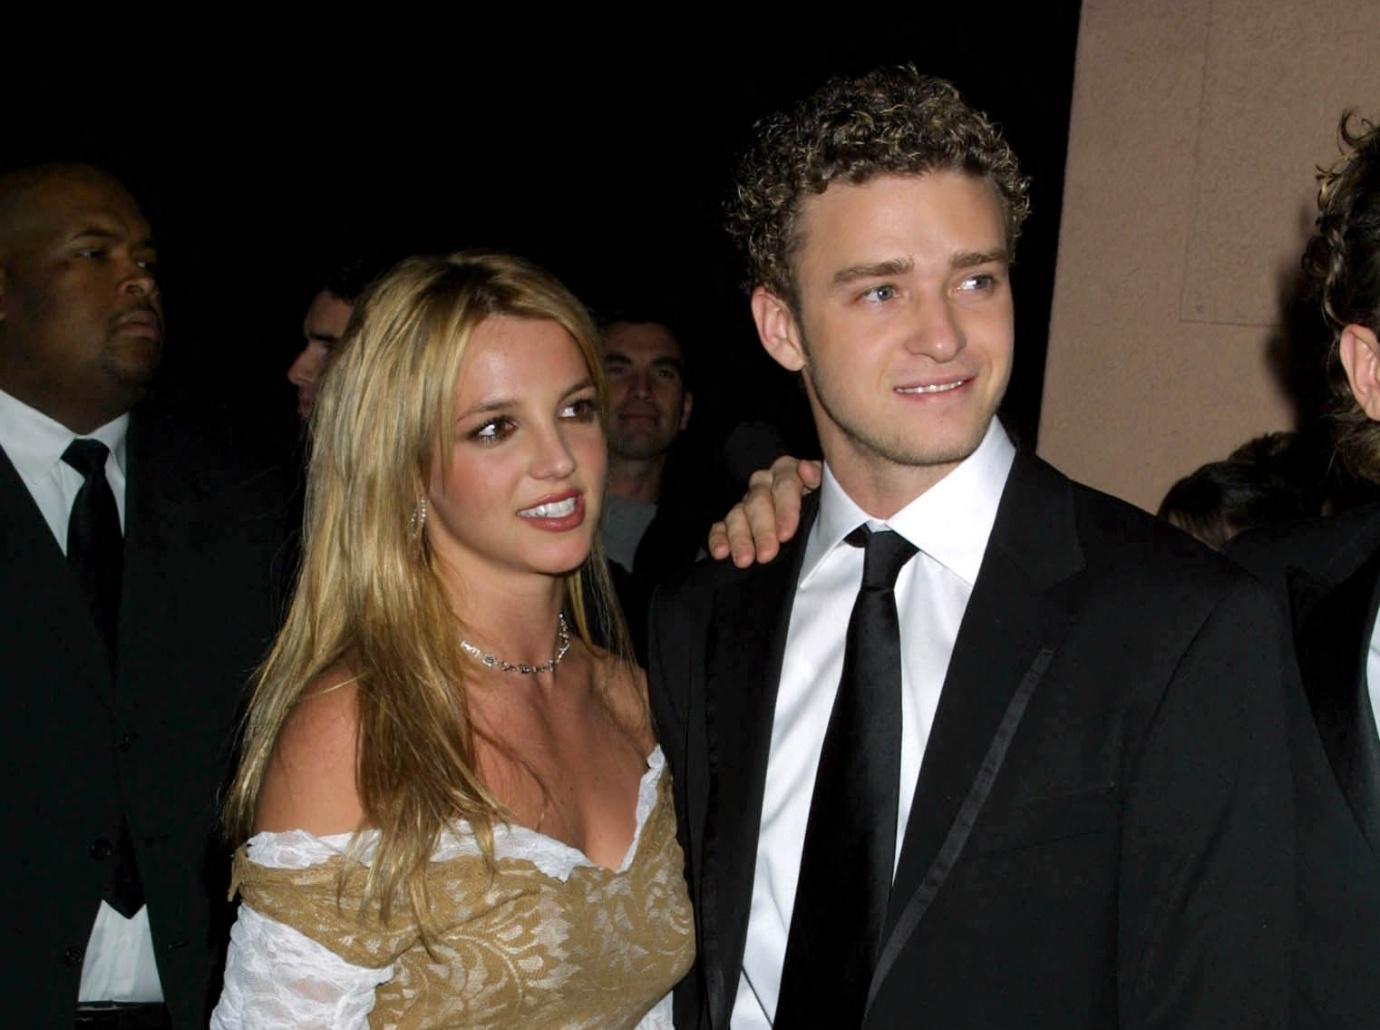 Justin Timberlake Was Asked Not To Perform Ex-Girlfriend Britney Spears'  'Cry Me A River' For This Reason But His Epic Reaction Is What Stole The  Show- Watch